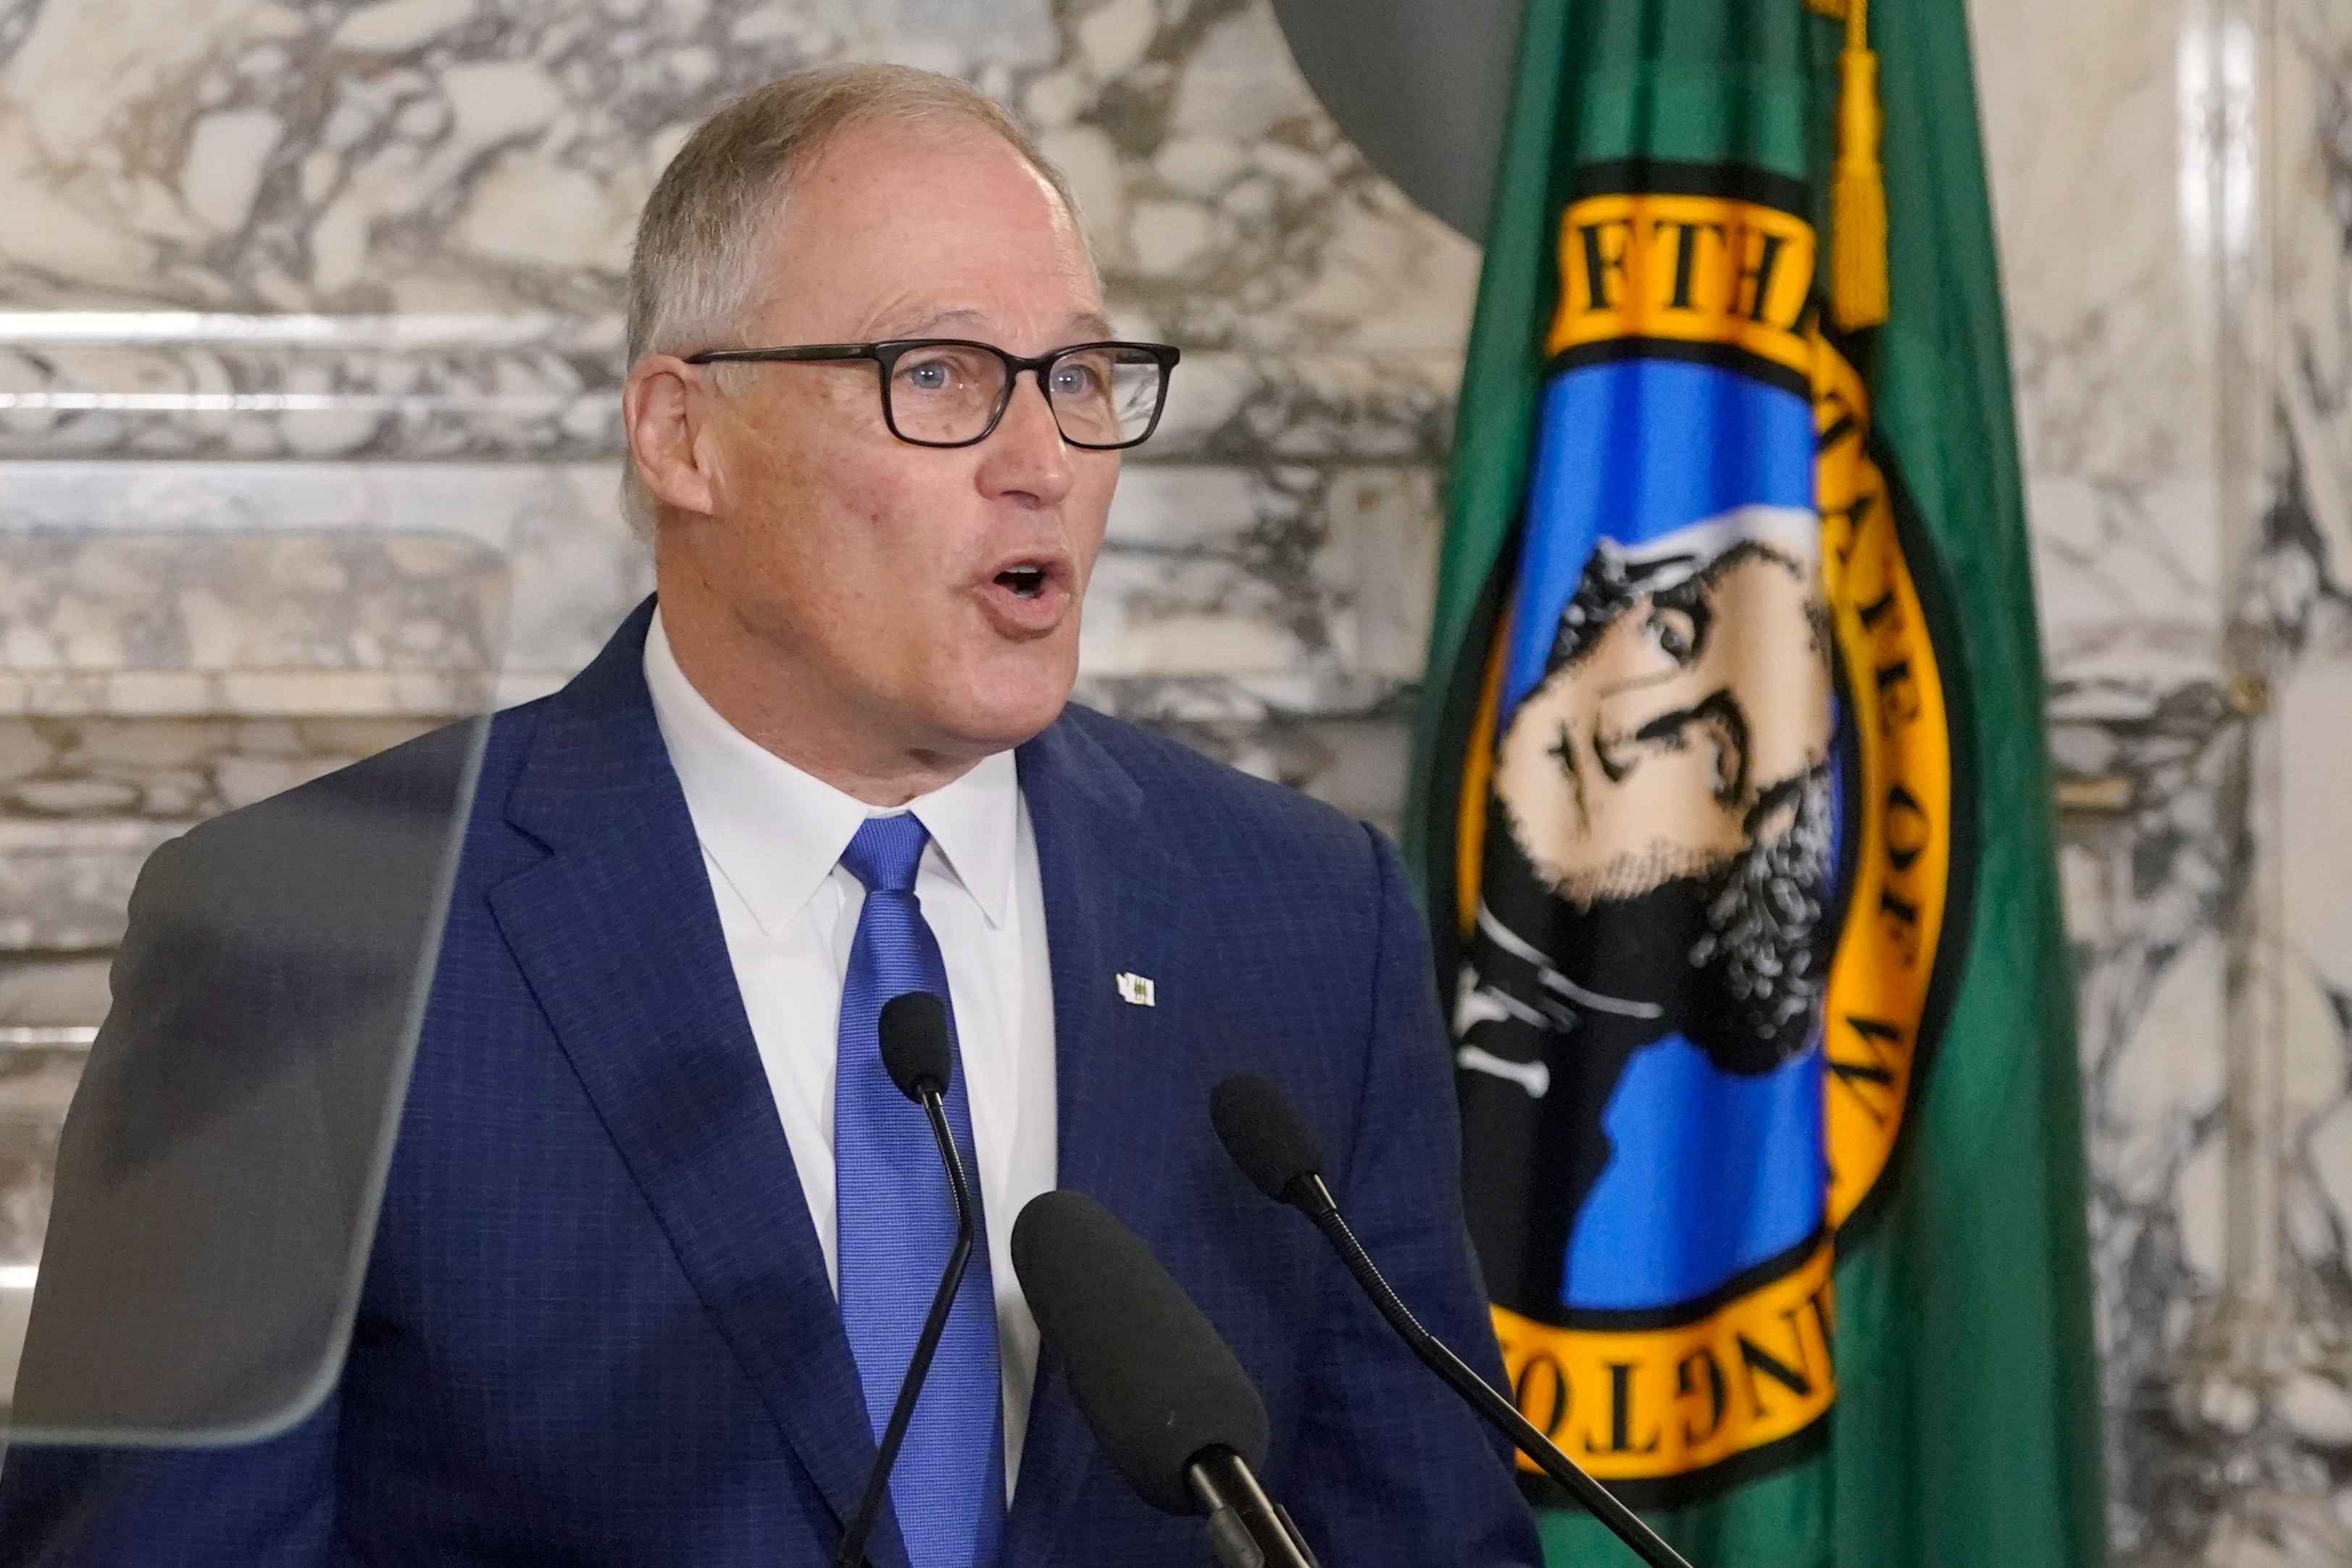 Jay Inslee sought the presidential nomination in 2020 on a climate crisis platform